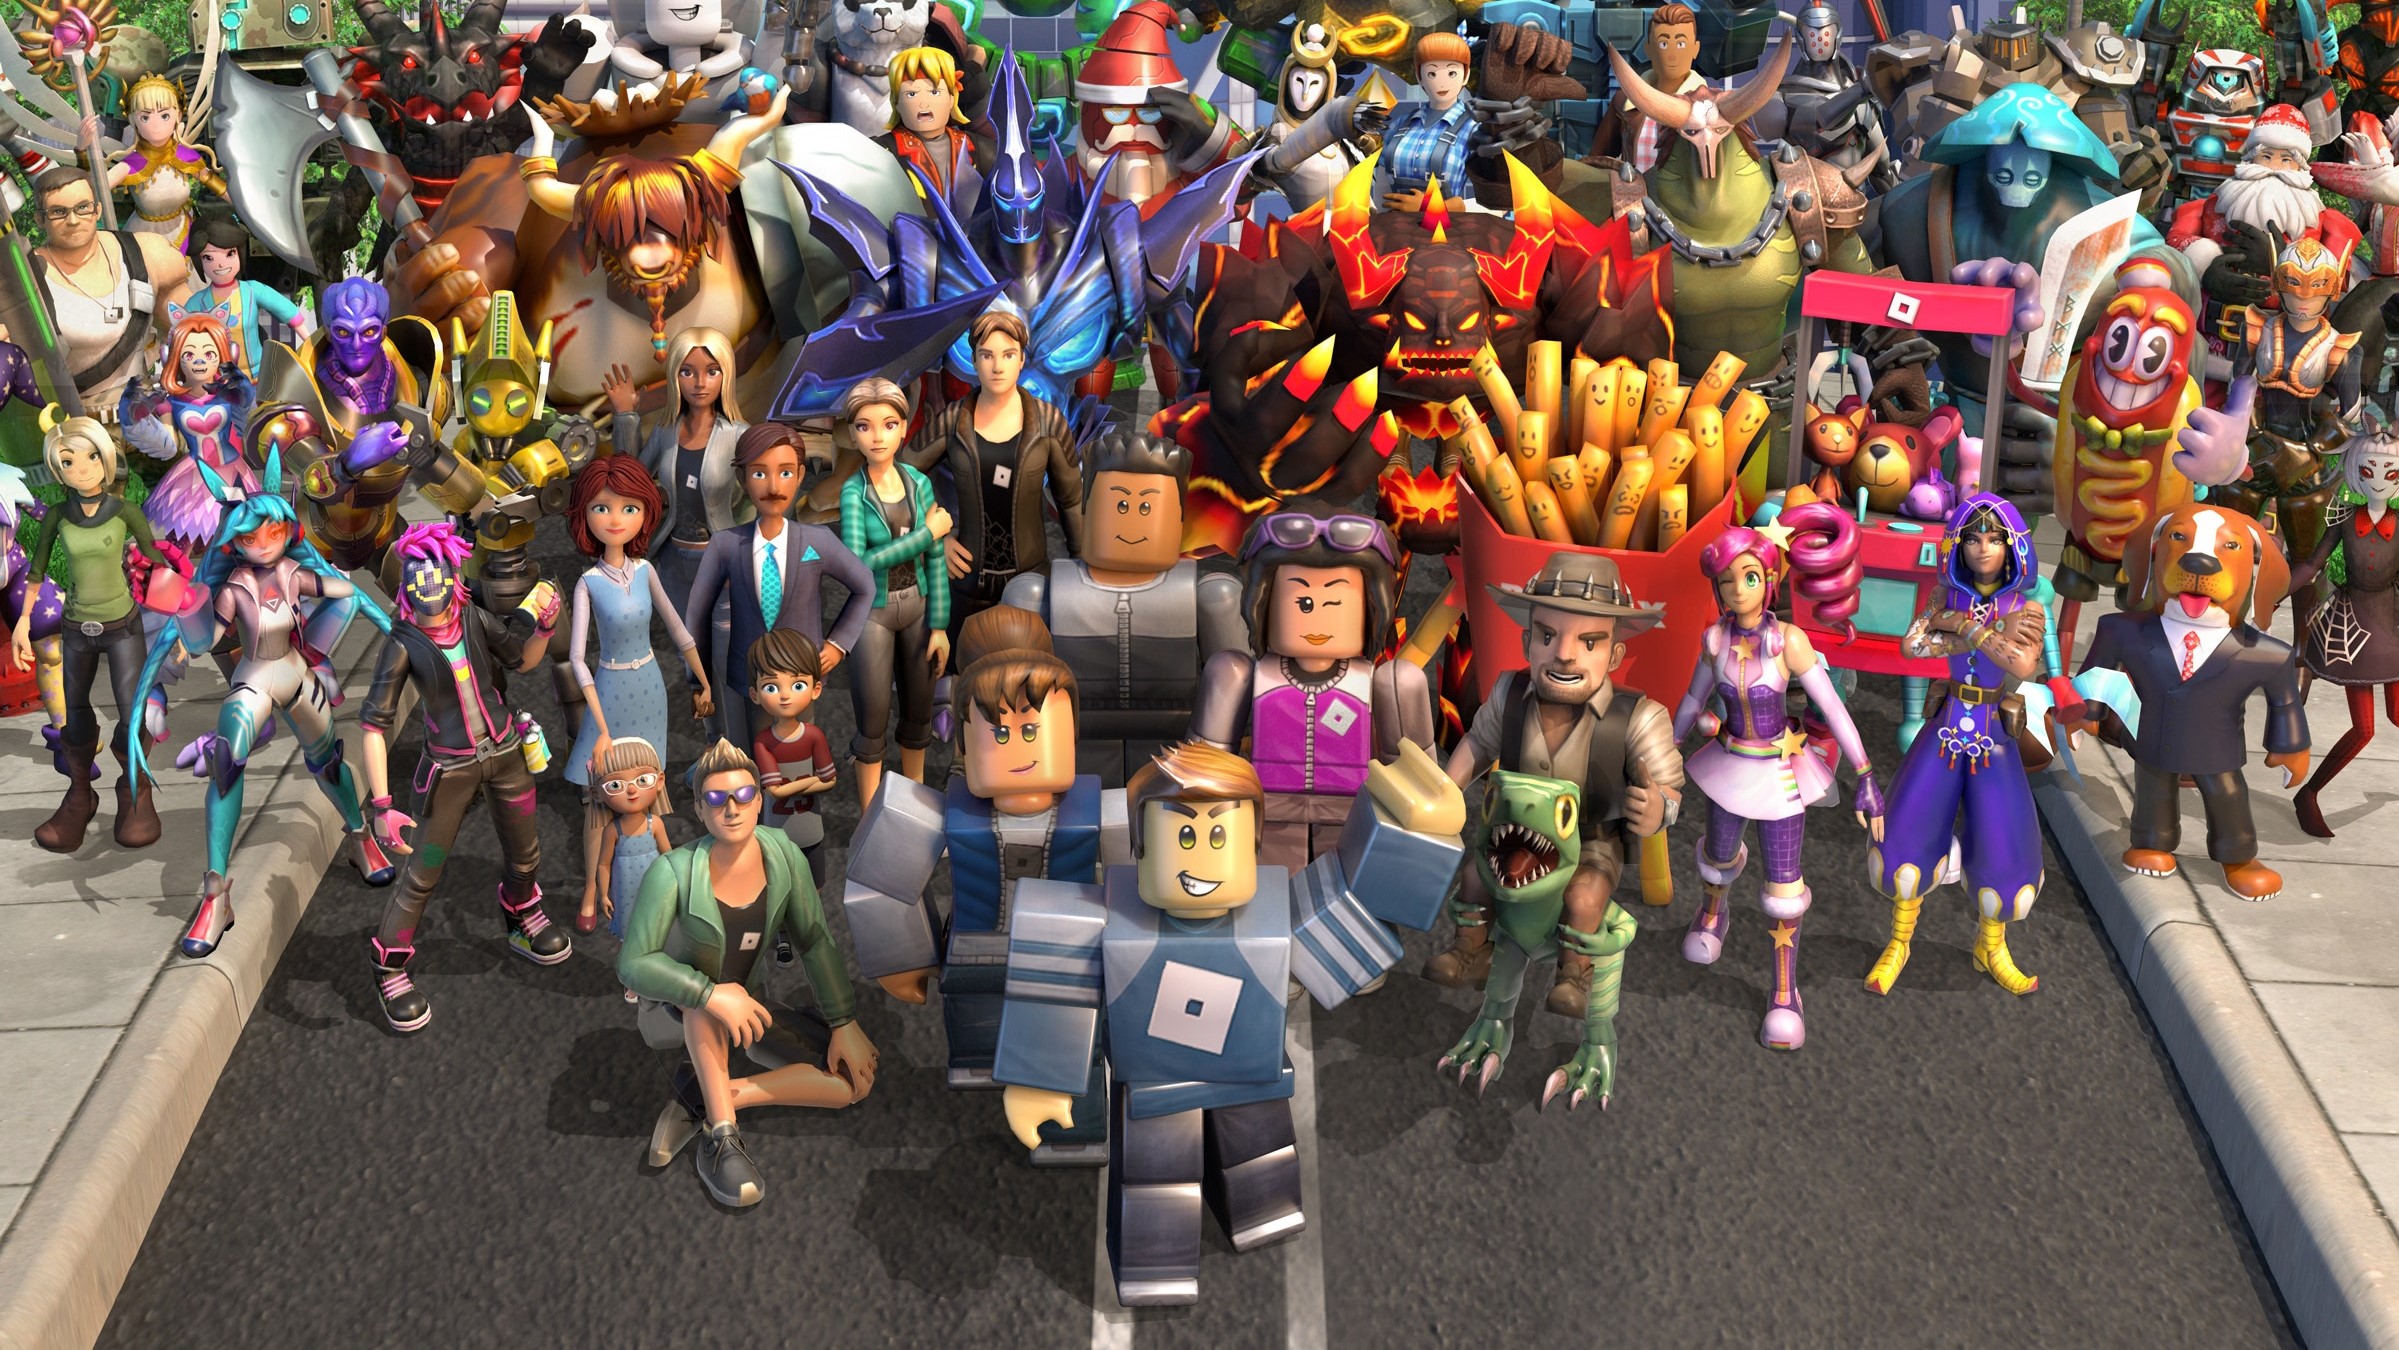  Roblox says it had over 1.7 billion users last month 